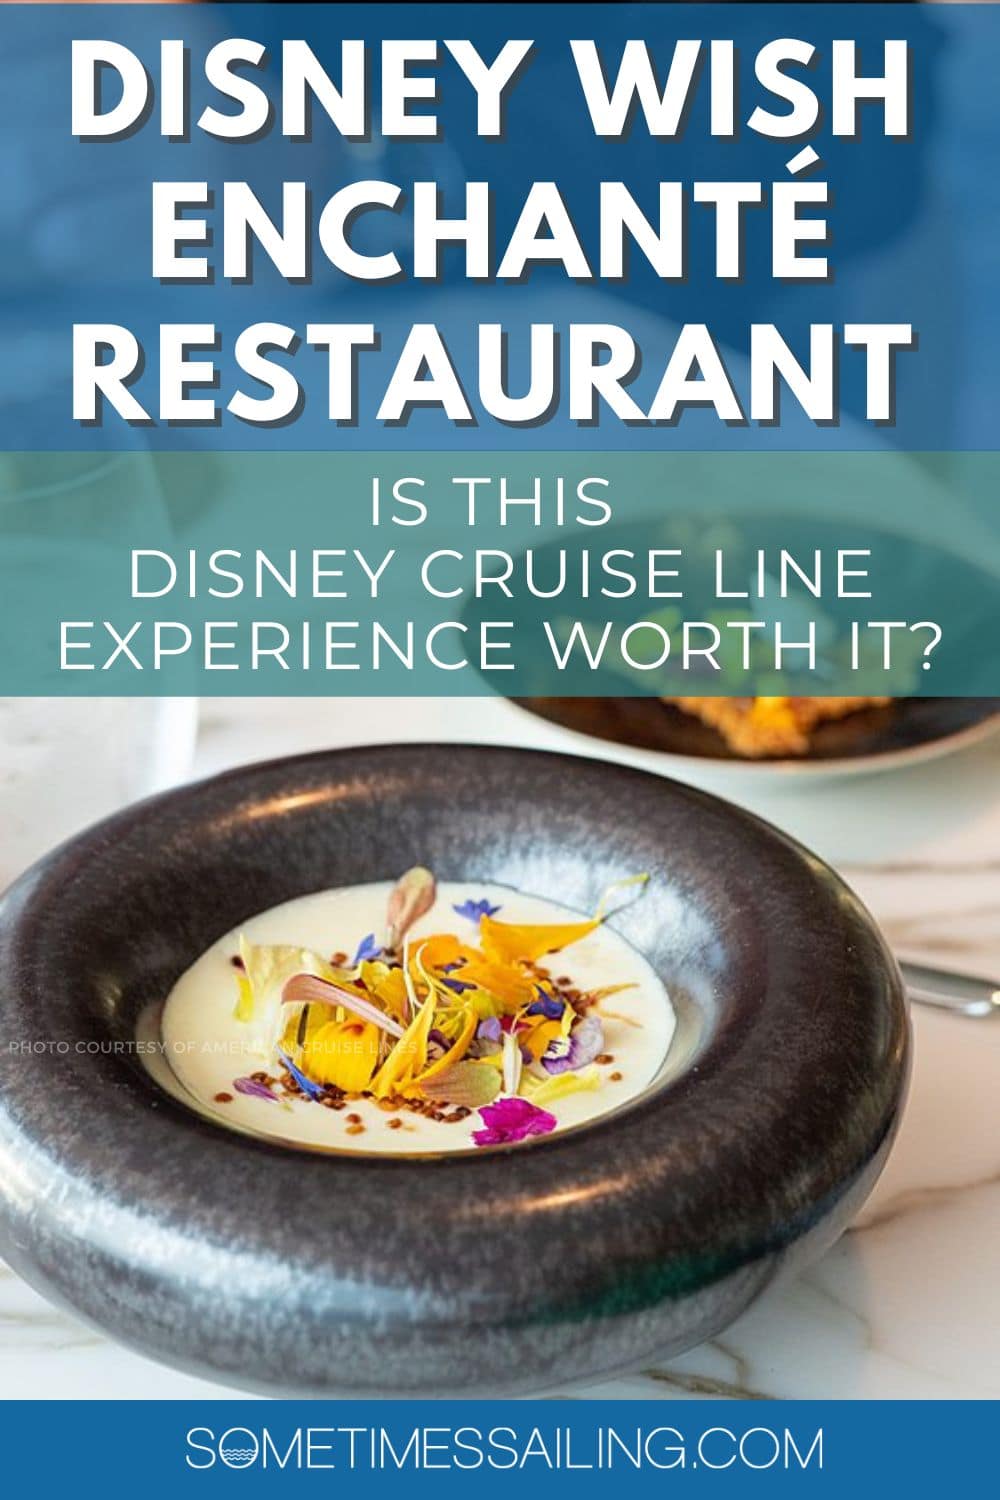 Disney Wish Enchanté Restaurant: Is this Disney Cruise Line Restaurant Worth it? A photo of a gourmet dish in a black bowl topped with flowers.